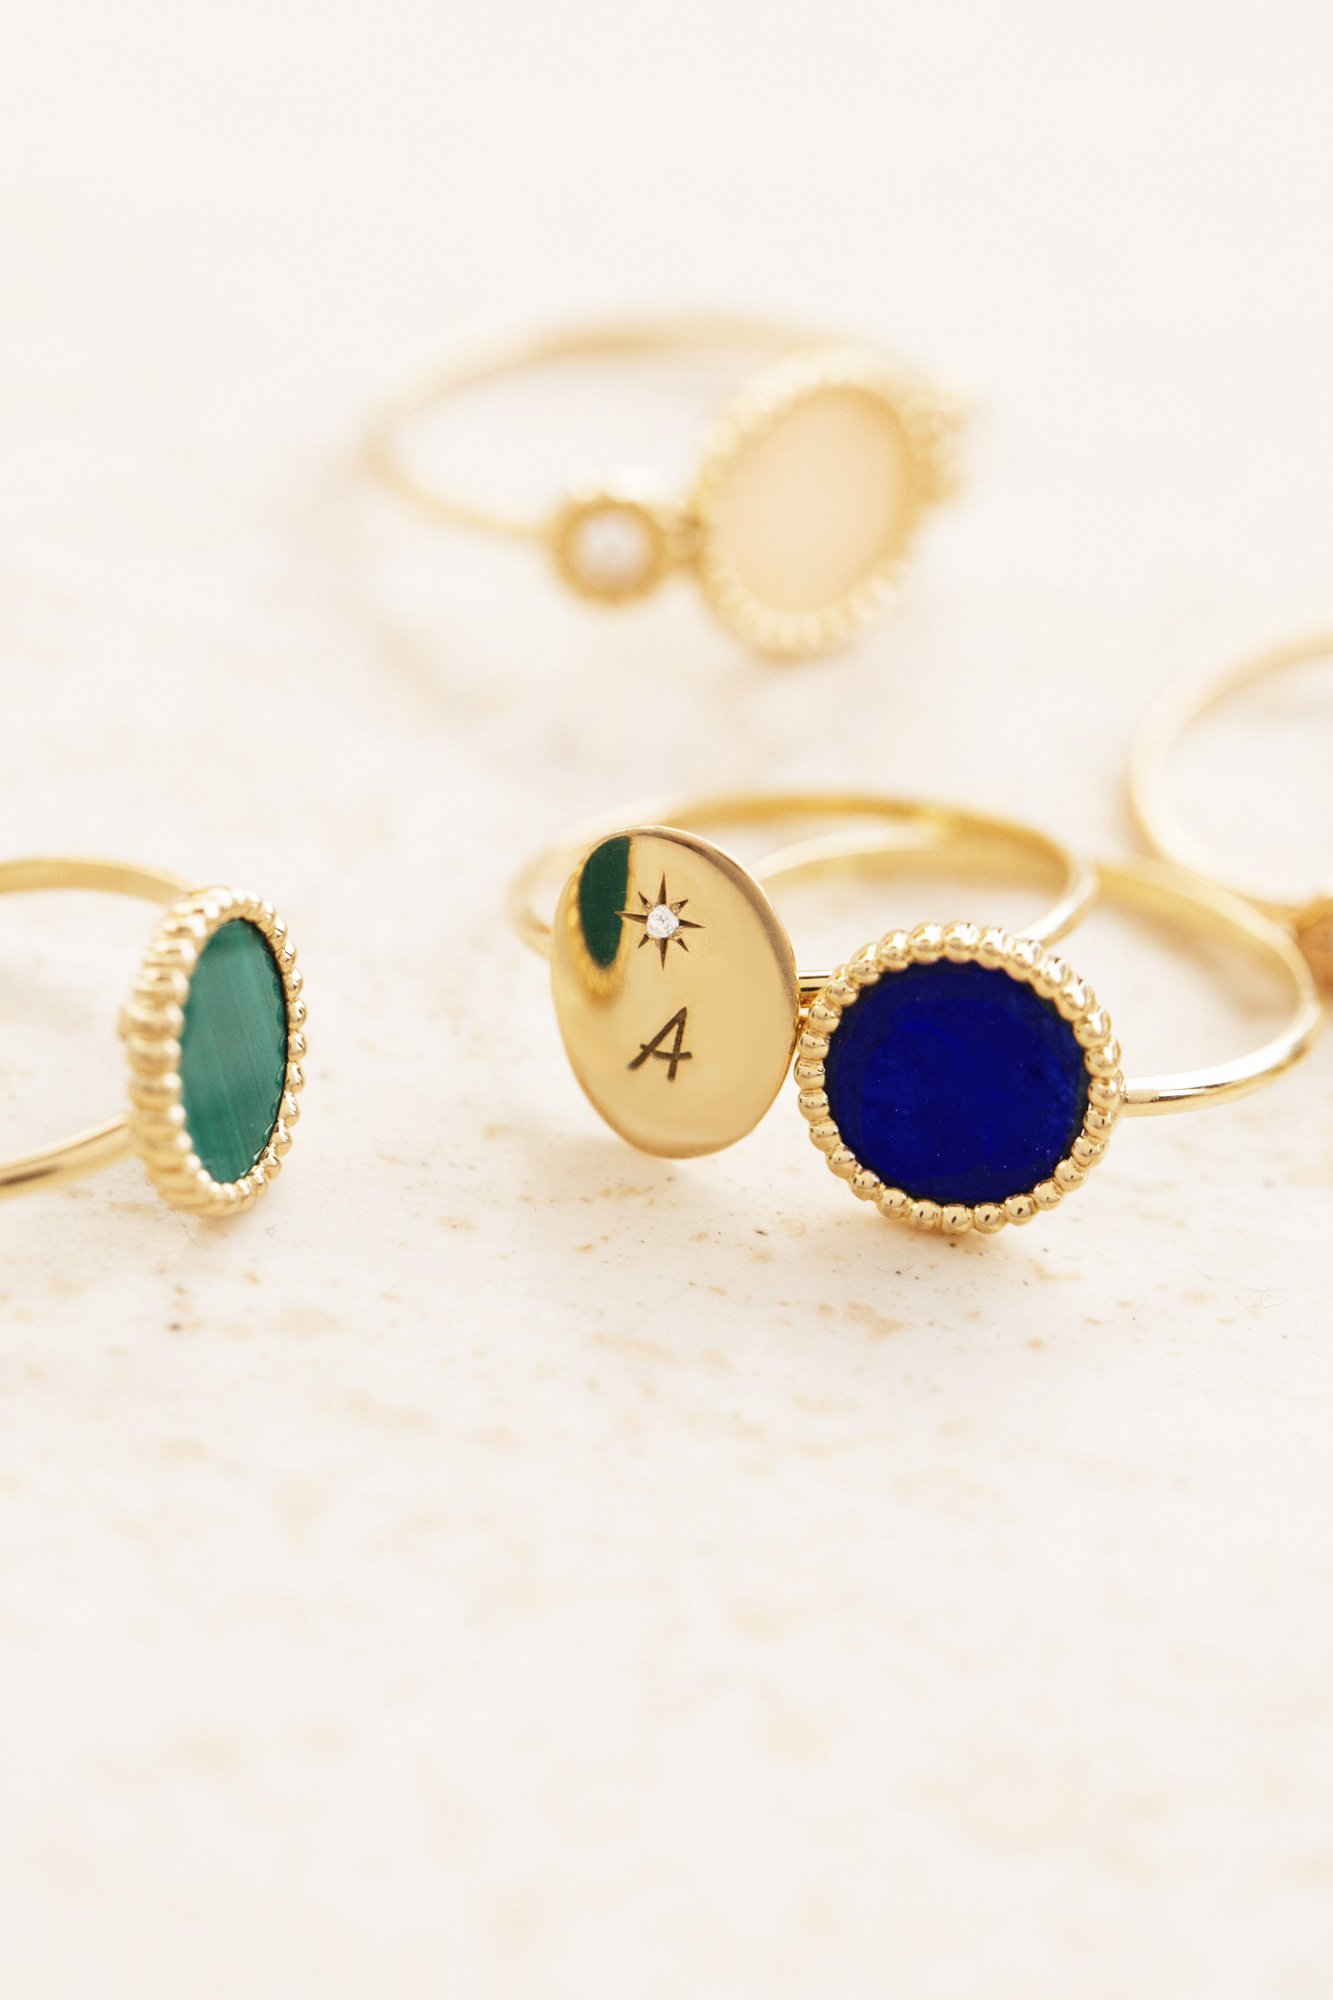 Rings from the Nuances  collection - 18K gold malachite and lapis lazuli